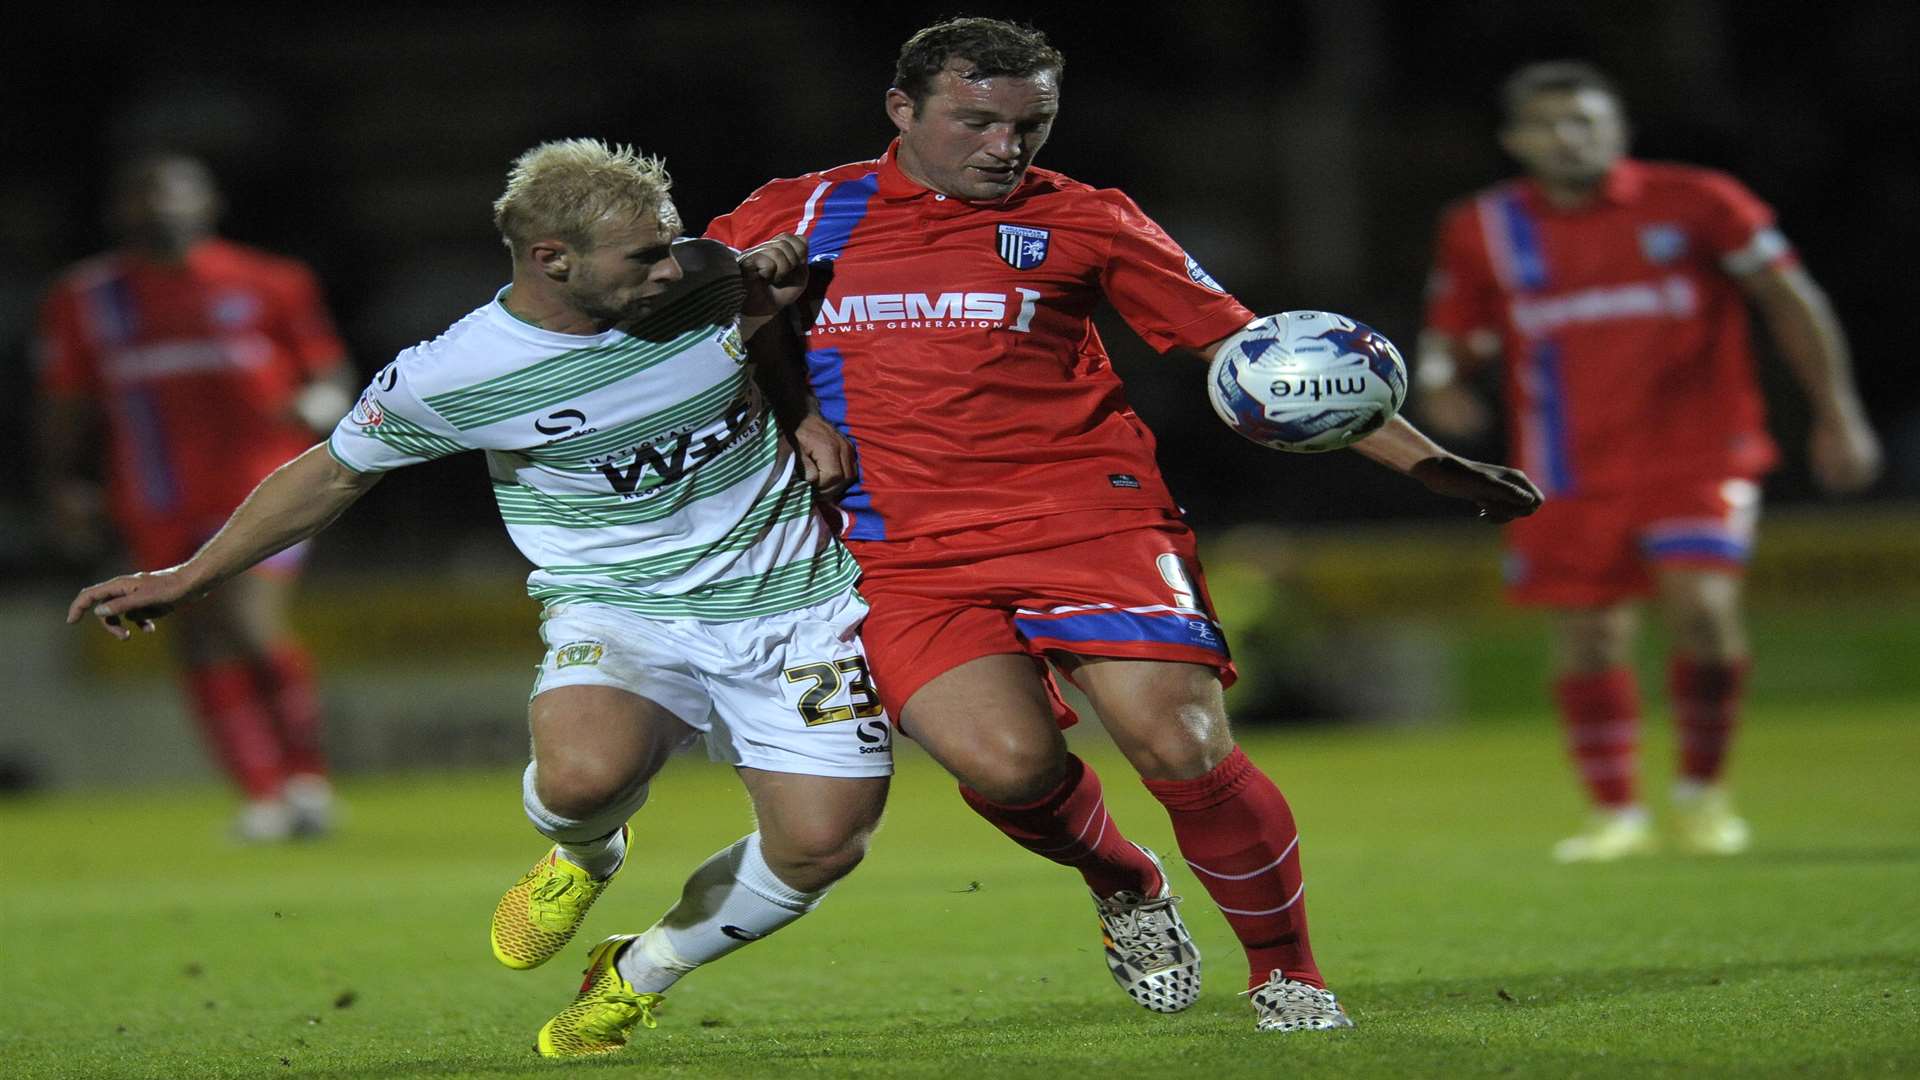 Danny Kedwell came on late to help Gills hold onto their 2-1 lead Picture: Ady Kerry